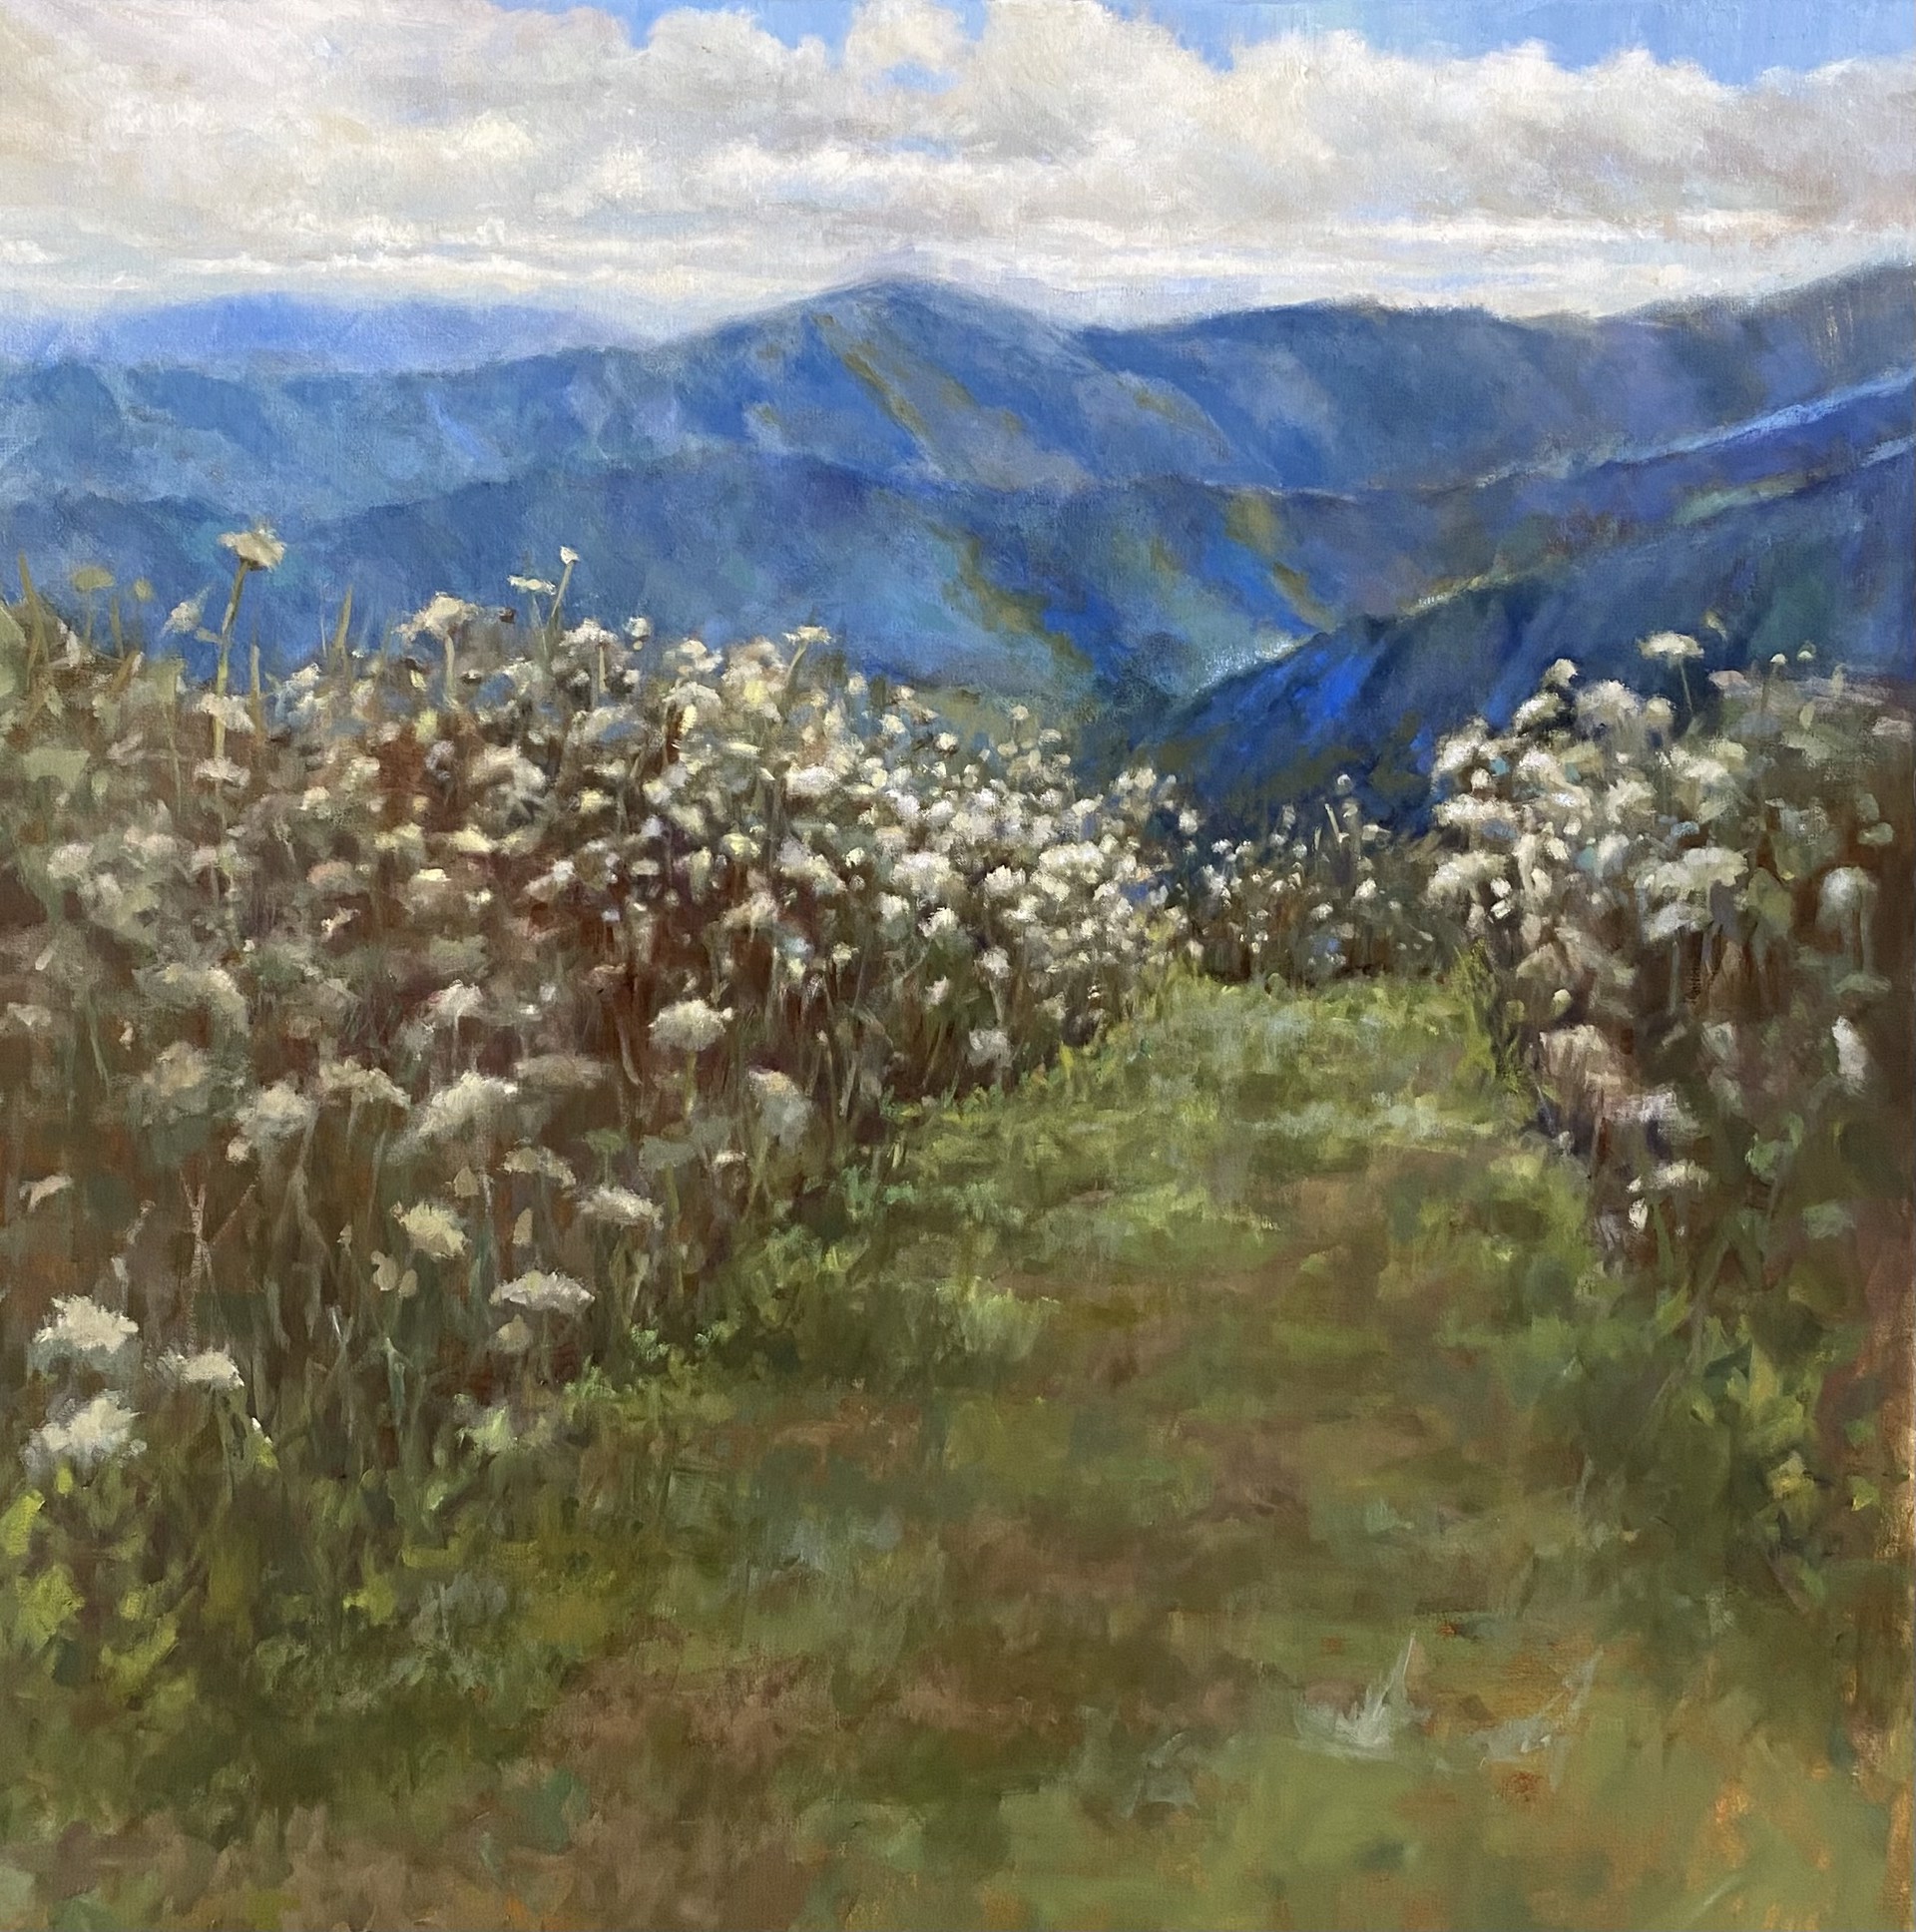 Gifts From the Blue Ridge Parkway by Laurie Meyer